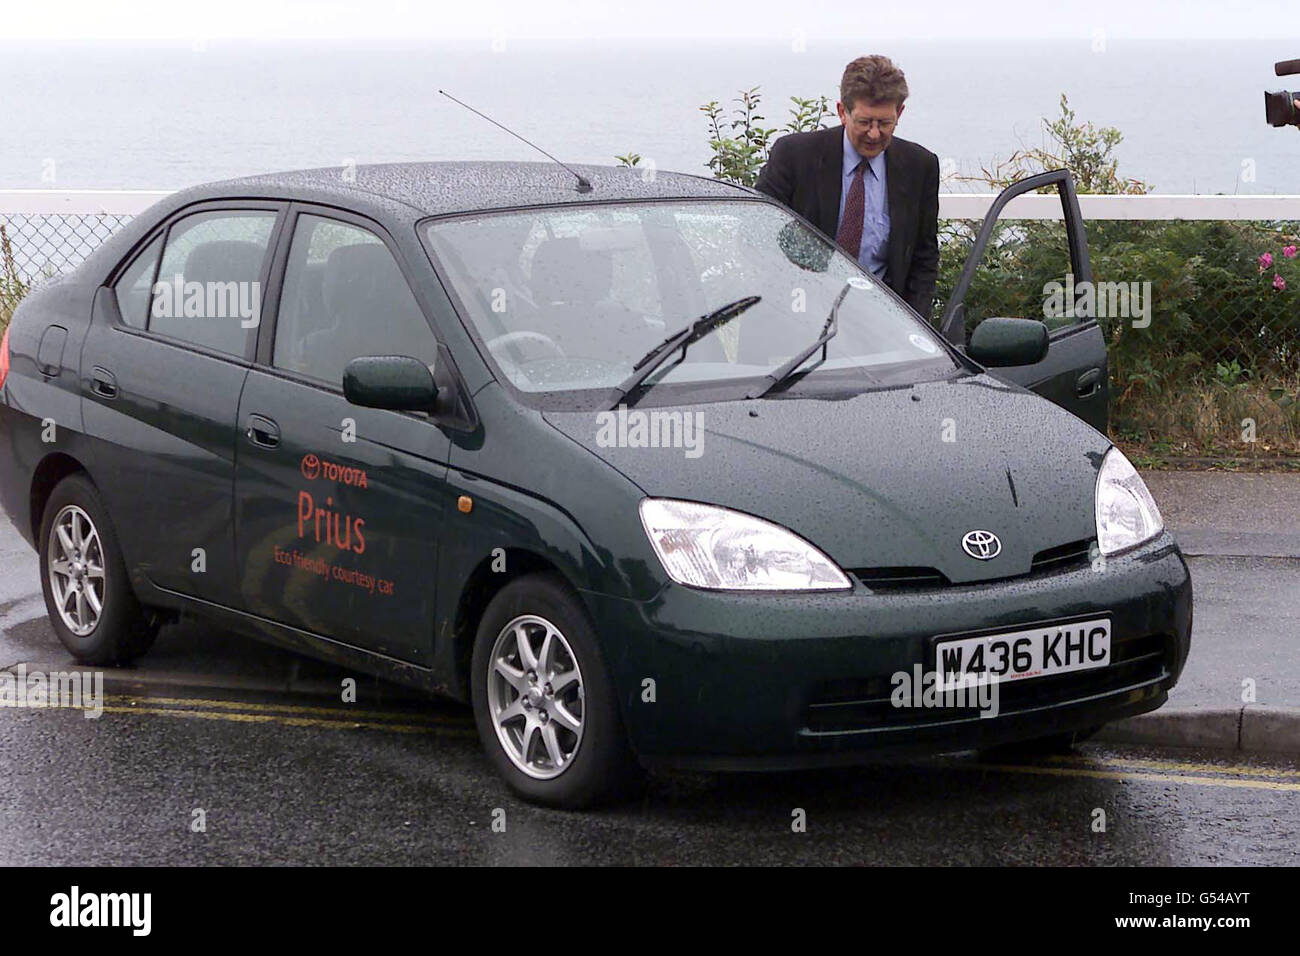 Don Foster, Liberal Democrat spokesman on transport at the party's annual conference in Bournemouth with a Toyota Prius, an electric-petrol driven hybrid car. * Earlier in the day Charles Kennedy, the party leader made an emergency statement on the current fuel crisis and said the tax on fuel should be capped. Stock Photo